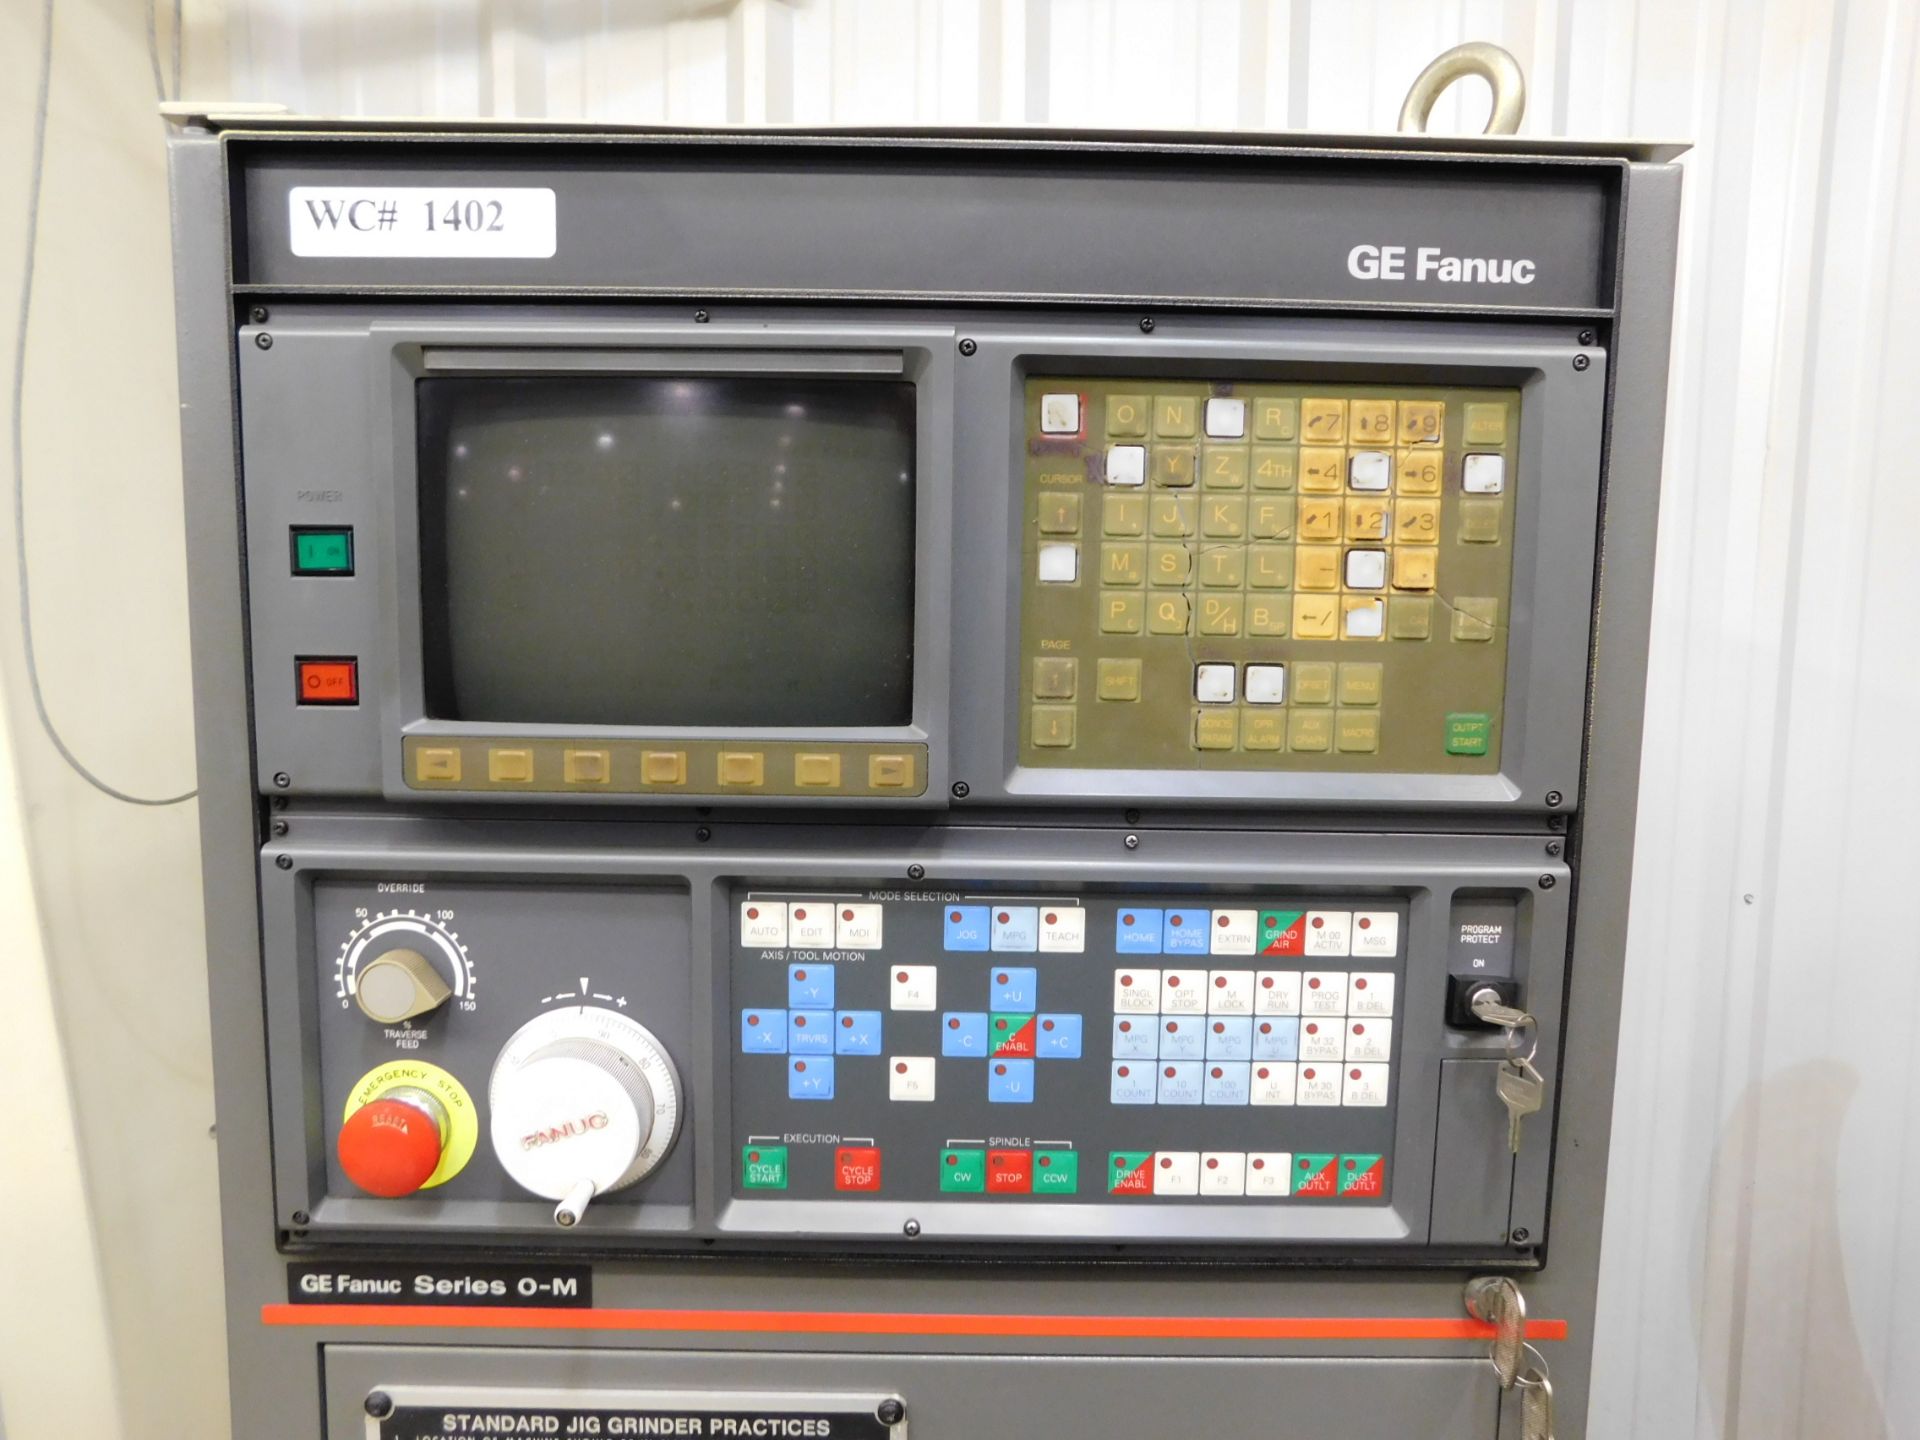 Moore Model G18 CNC Jig Grinder snG900, w/GE Fanuc Series 0-M Cnc Control - Image 10 of 10